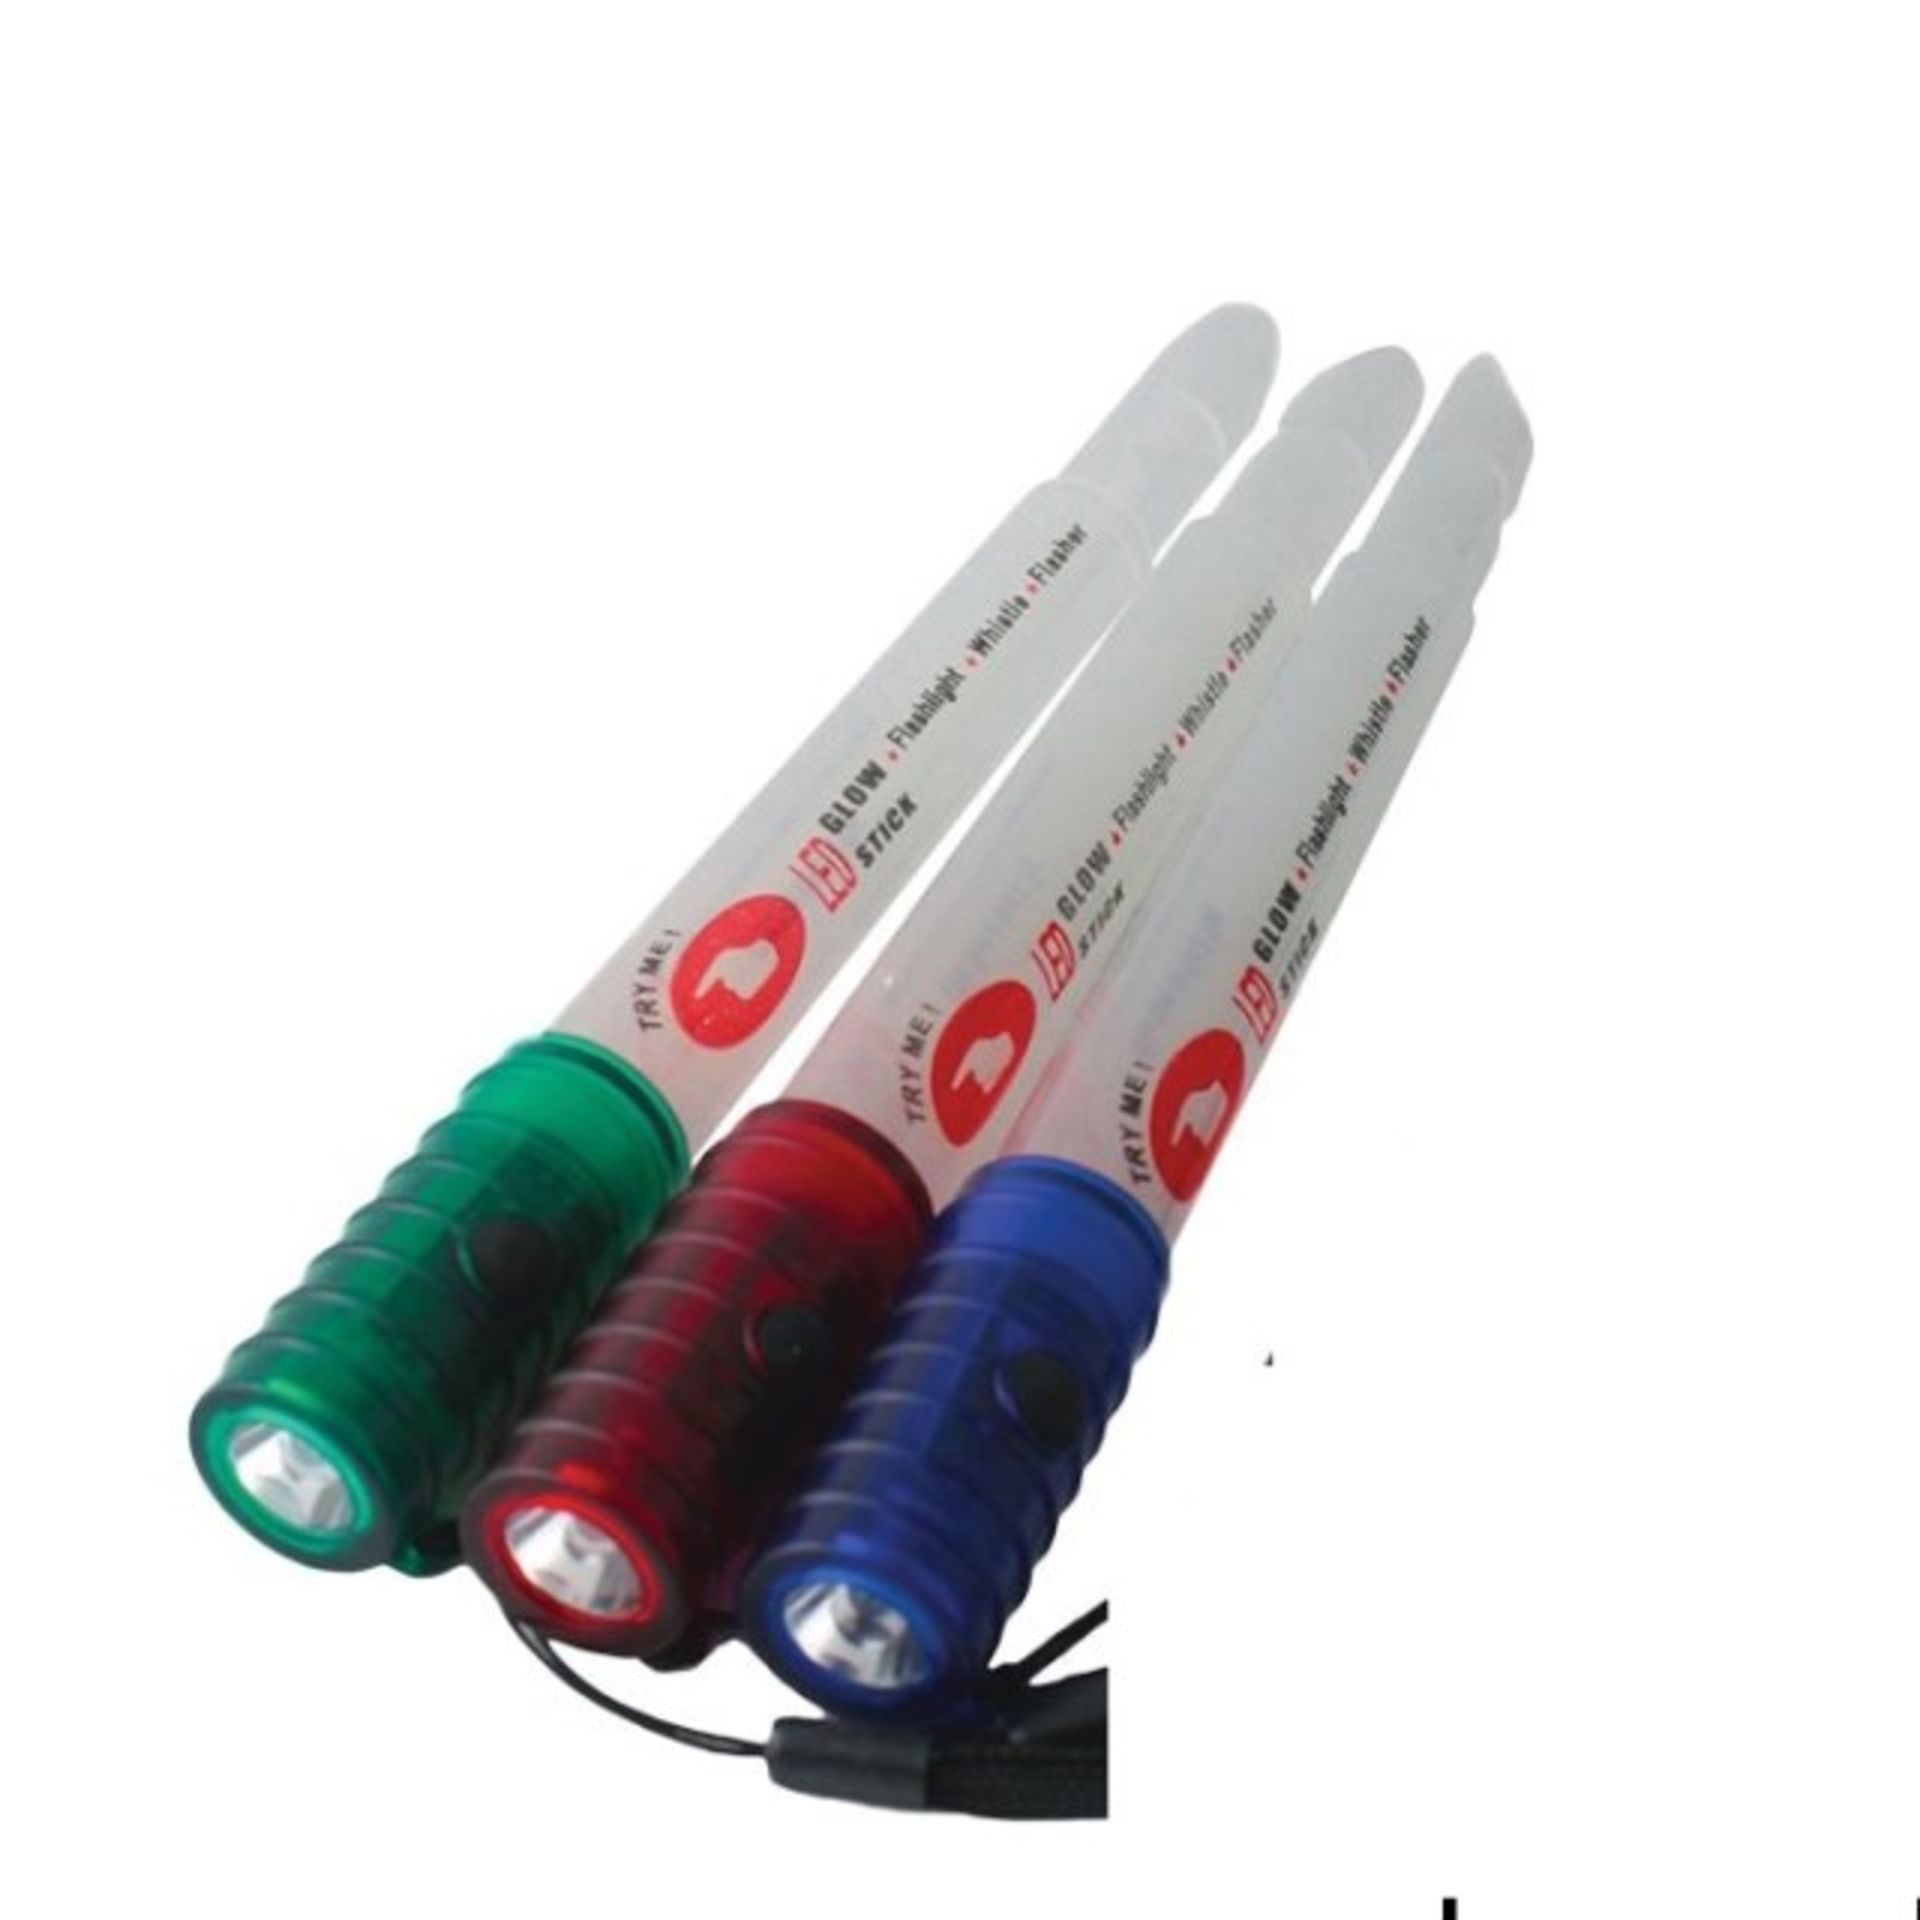 V Brand New Three LED Glowstick Torches With Emergency Whistle and 3 Light Settings Includes - Image 4 of 4